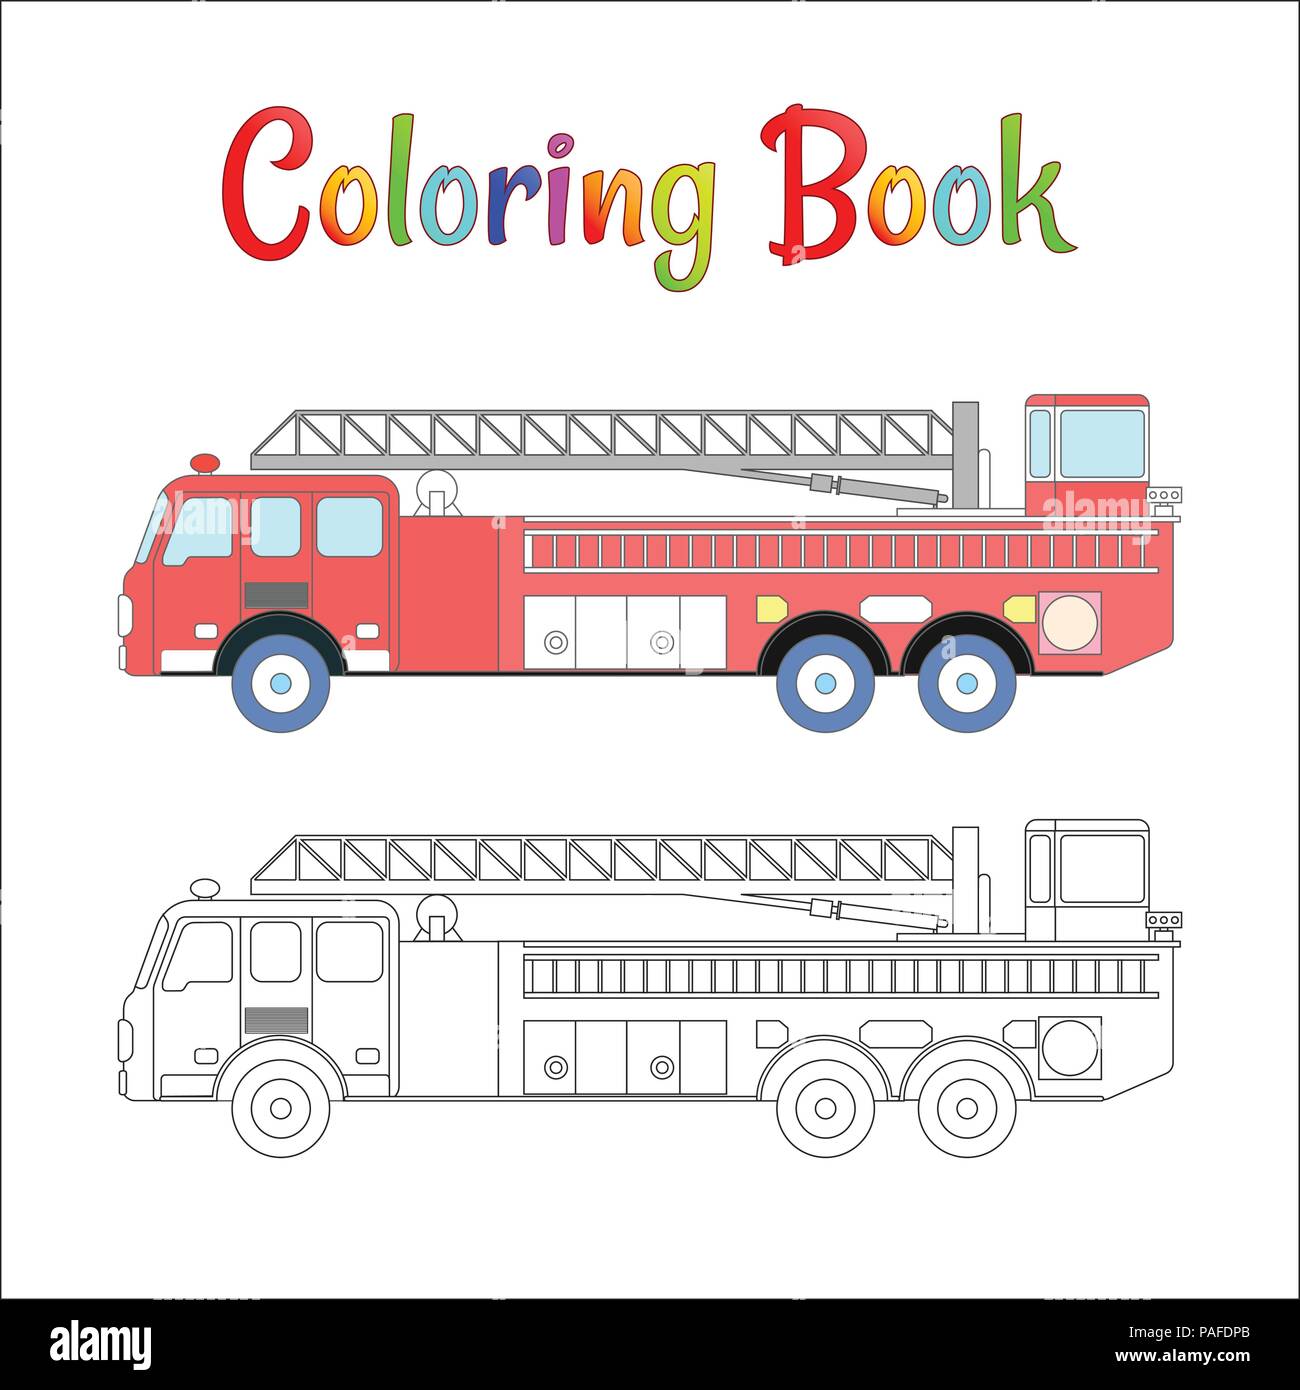 Fire truck coloring book vector. Coloring pages for kids Vector illustration eps 10. Stock Vector